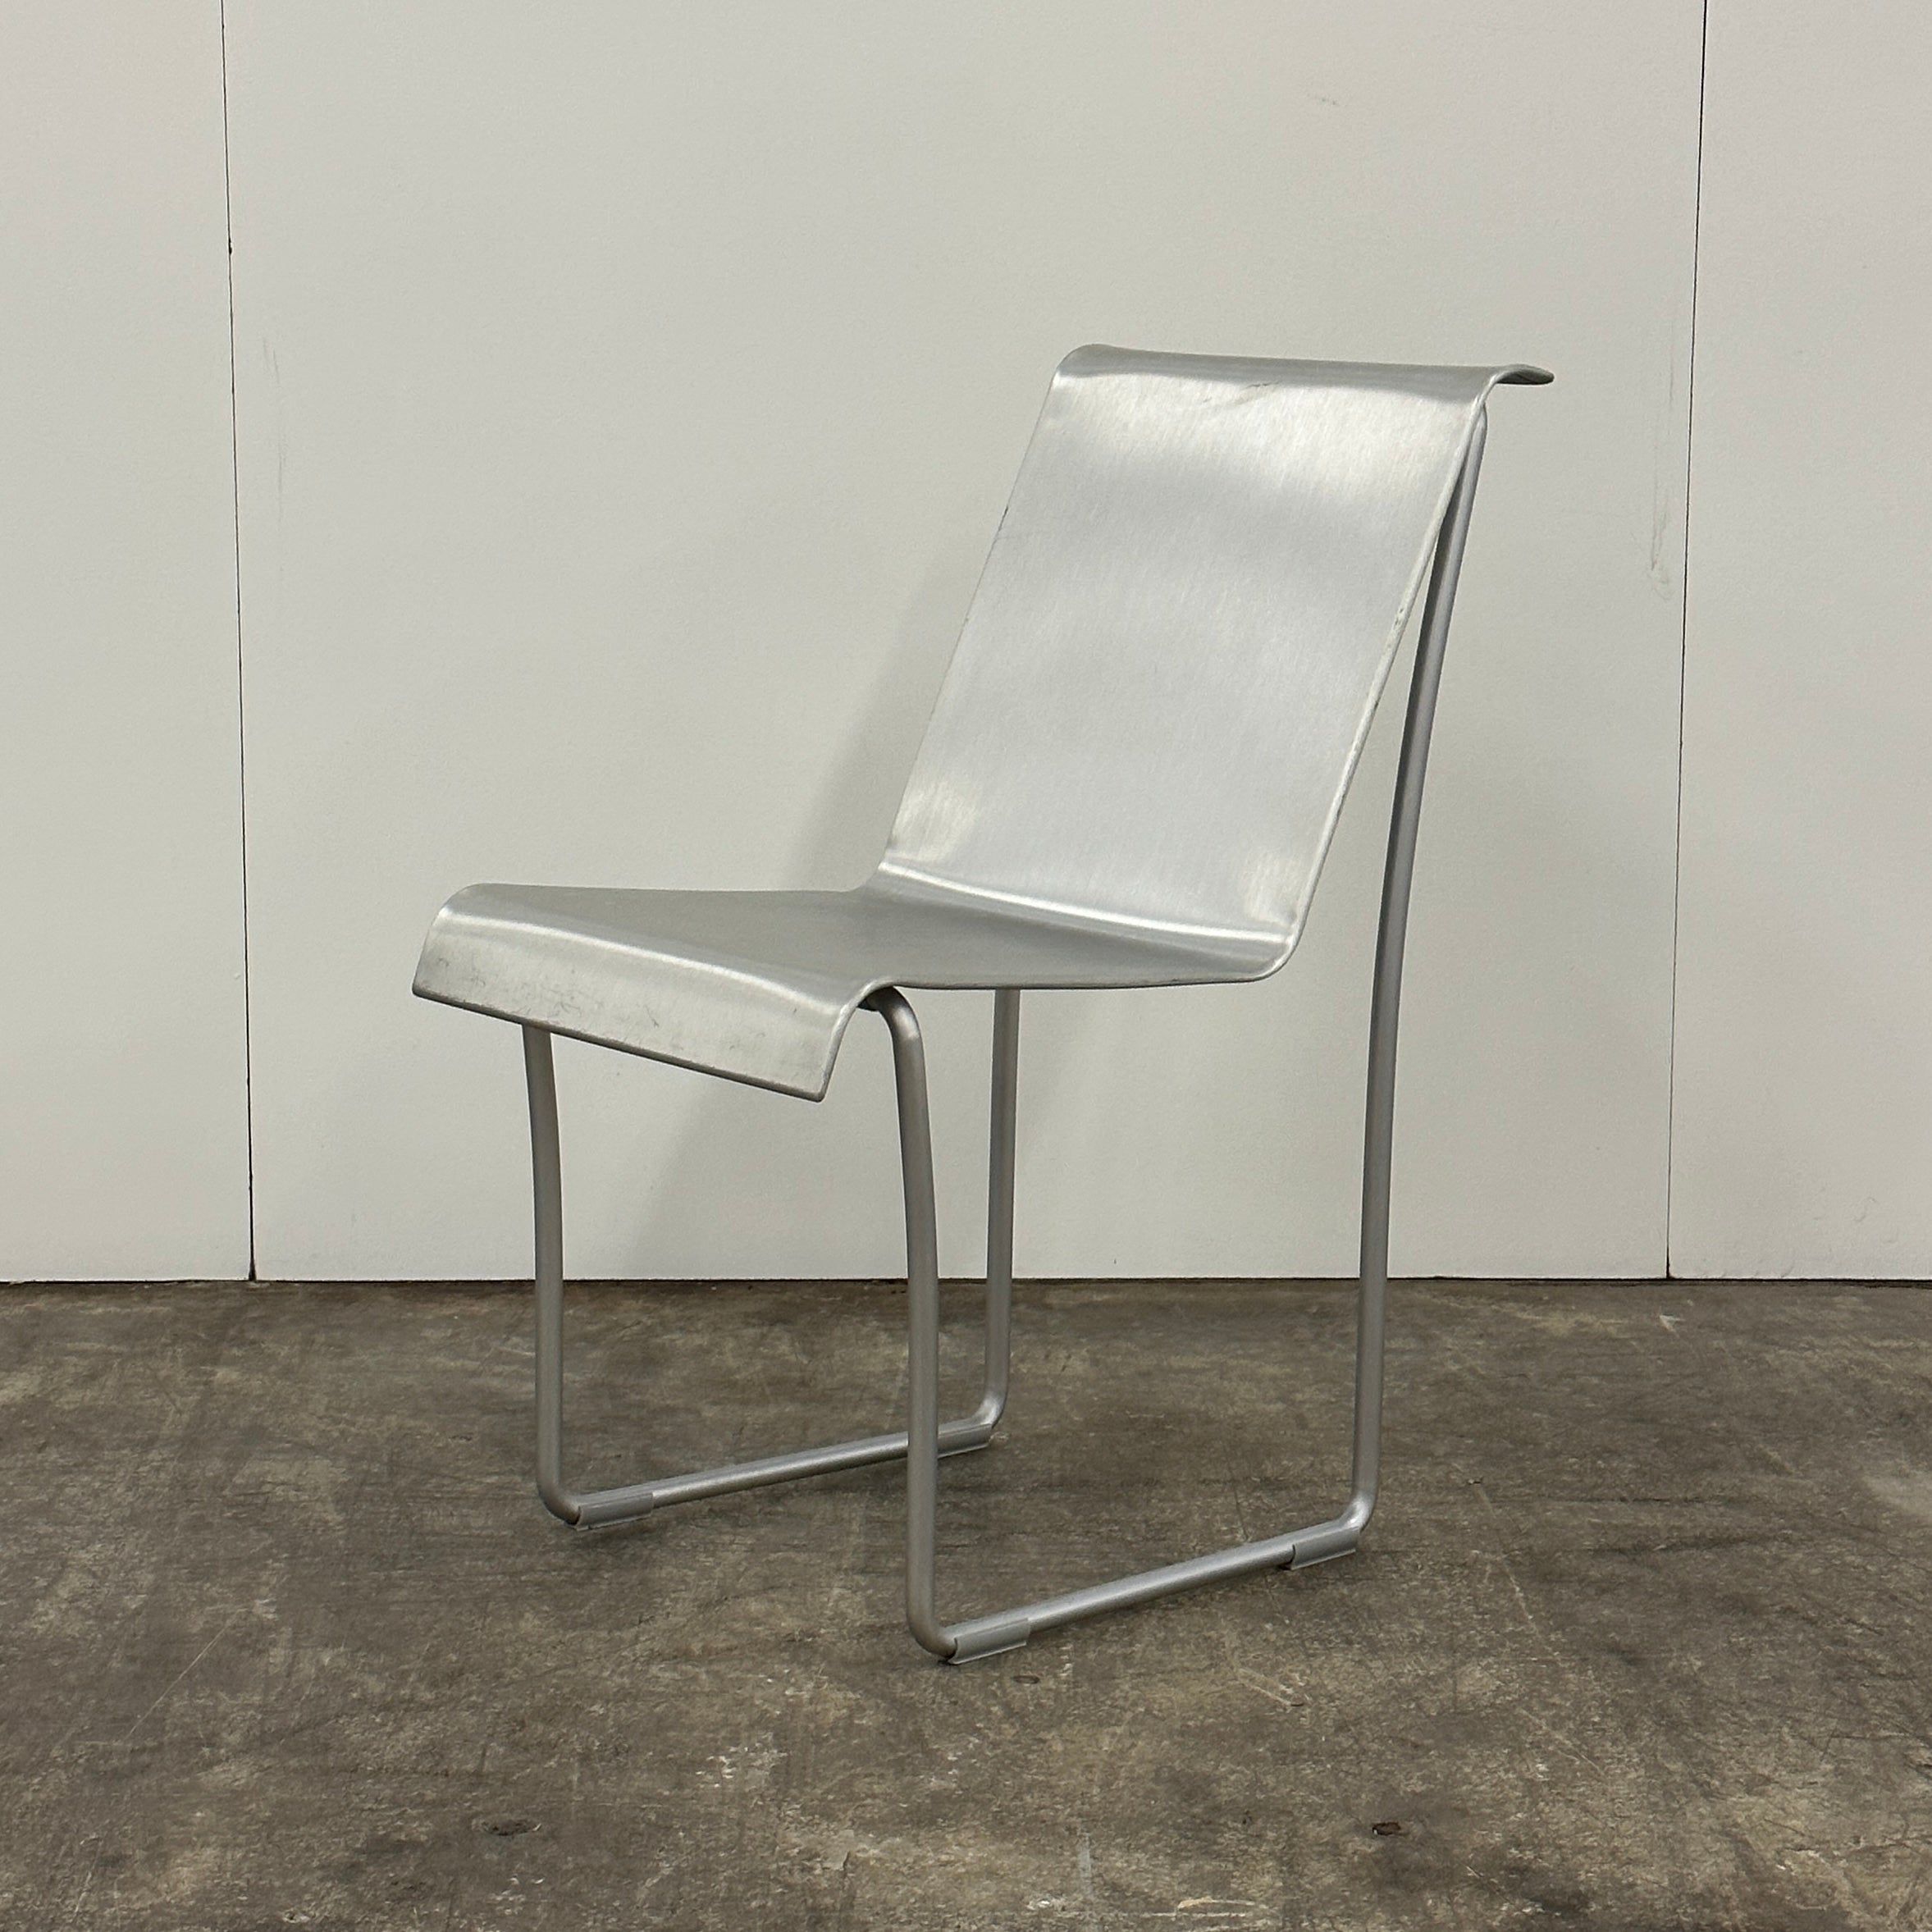 Superlight Chair by Frank Gehry for Emeco – spotexclamationpoint